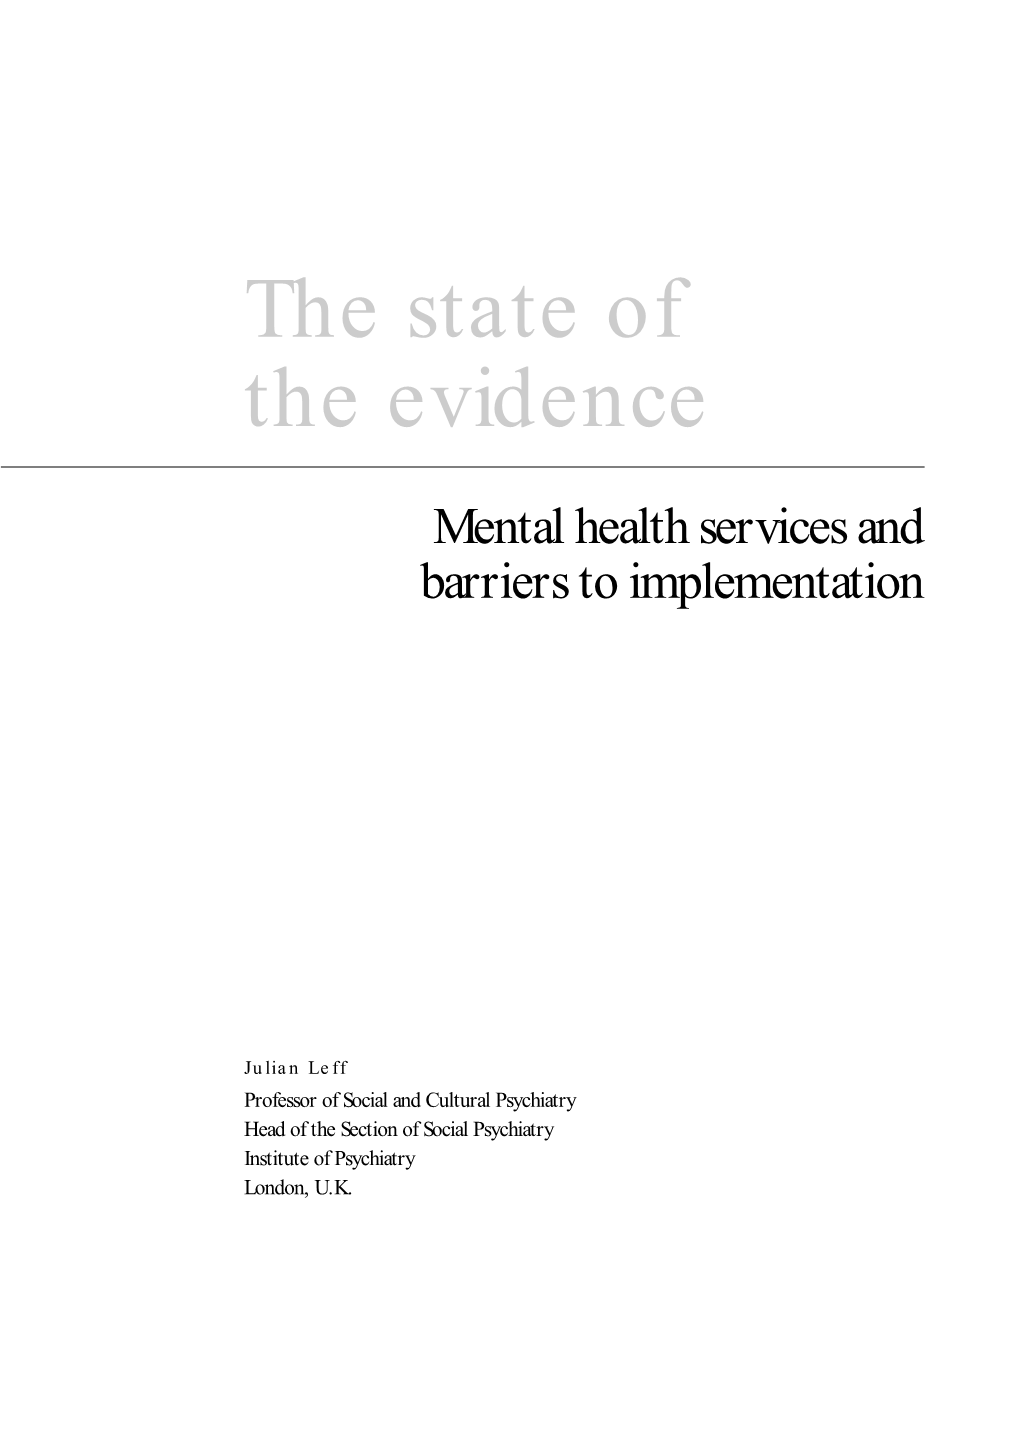 The State of the Evidence